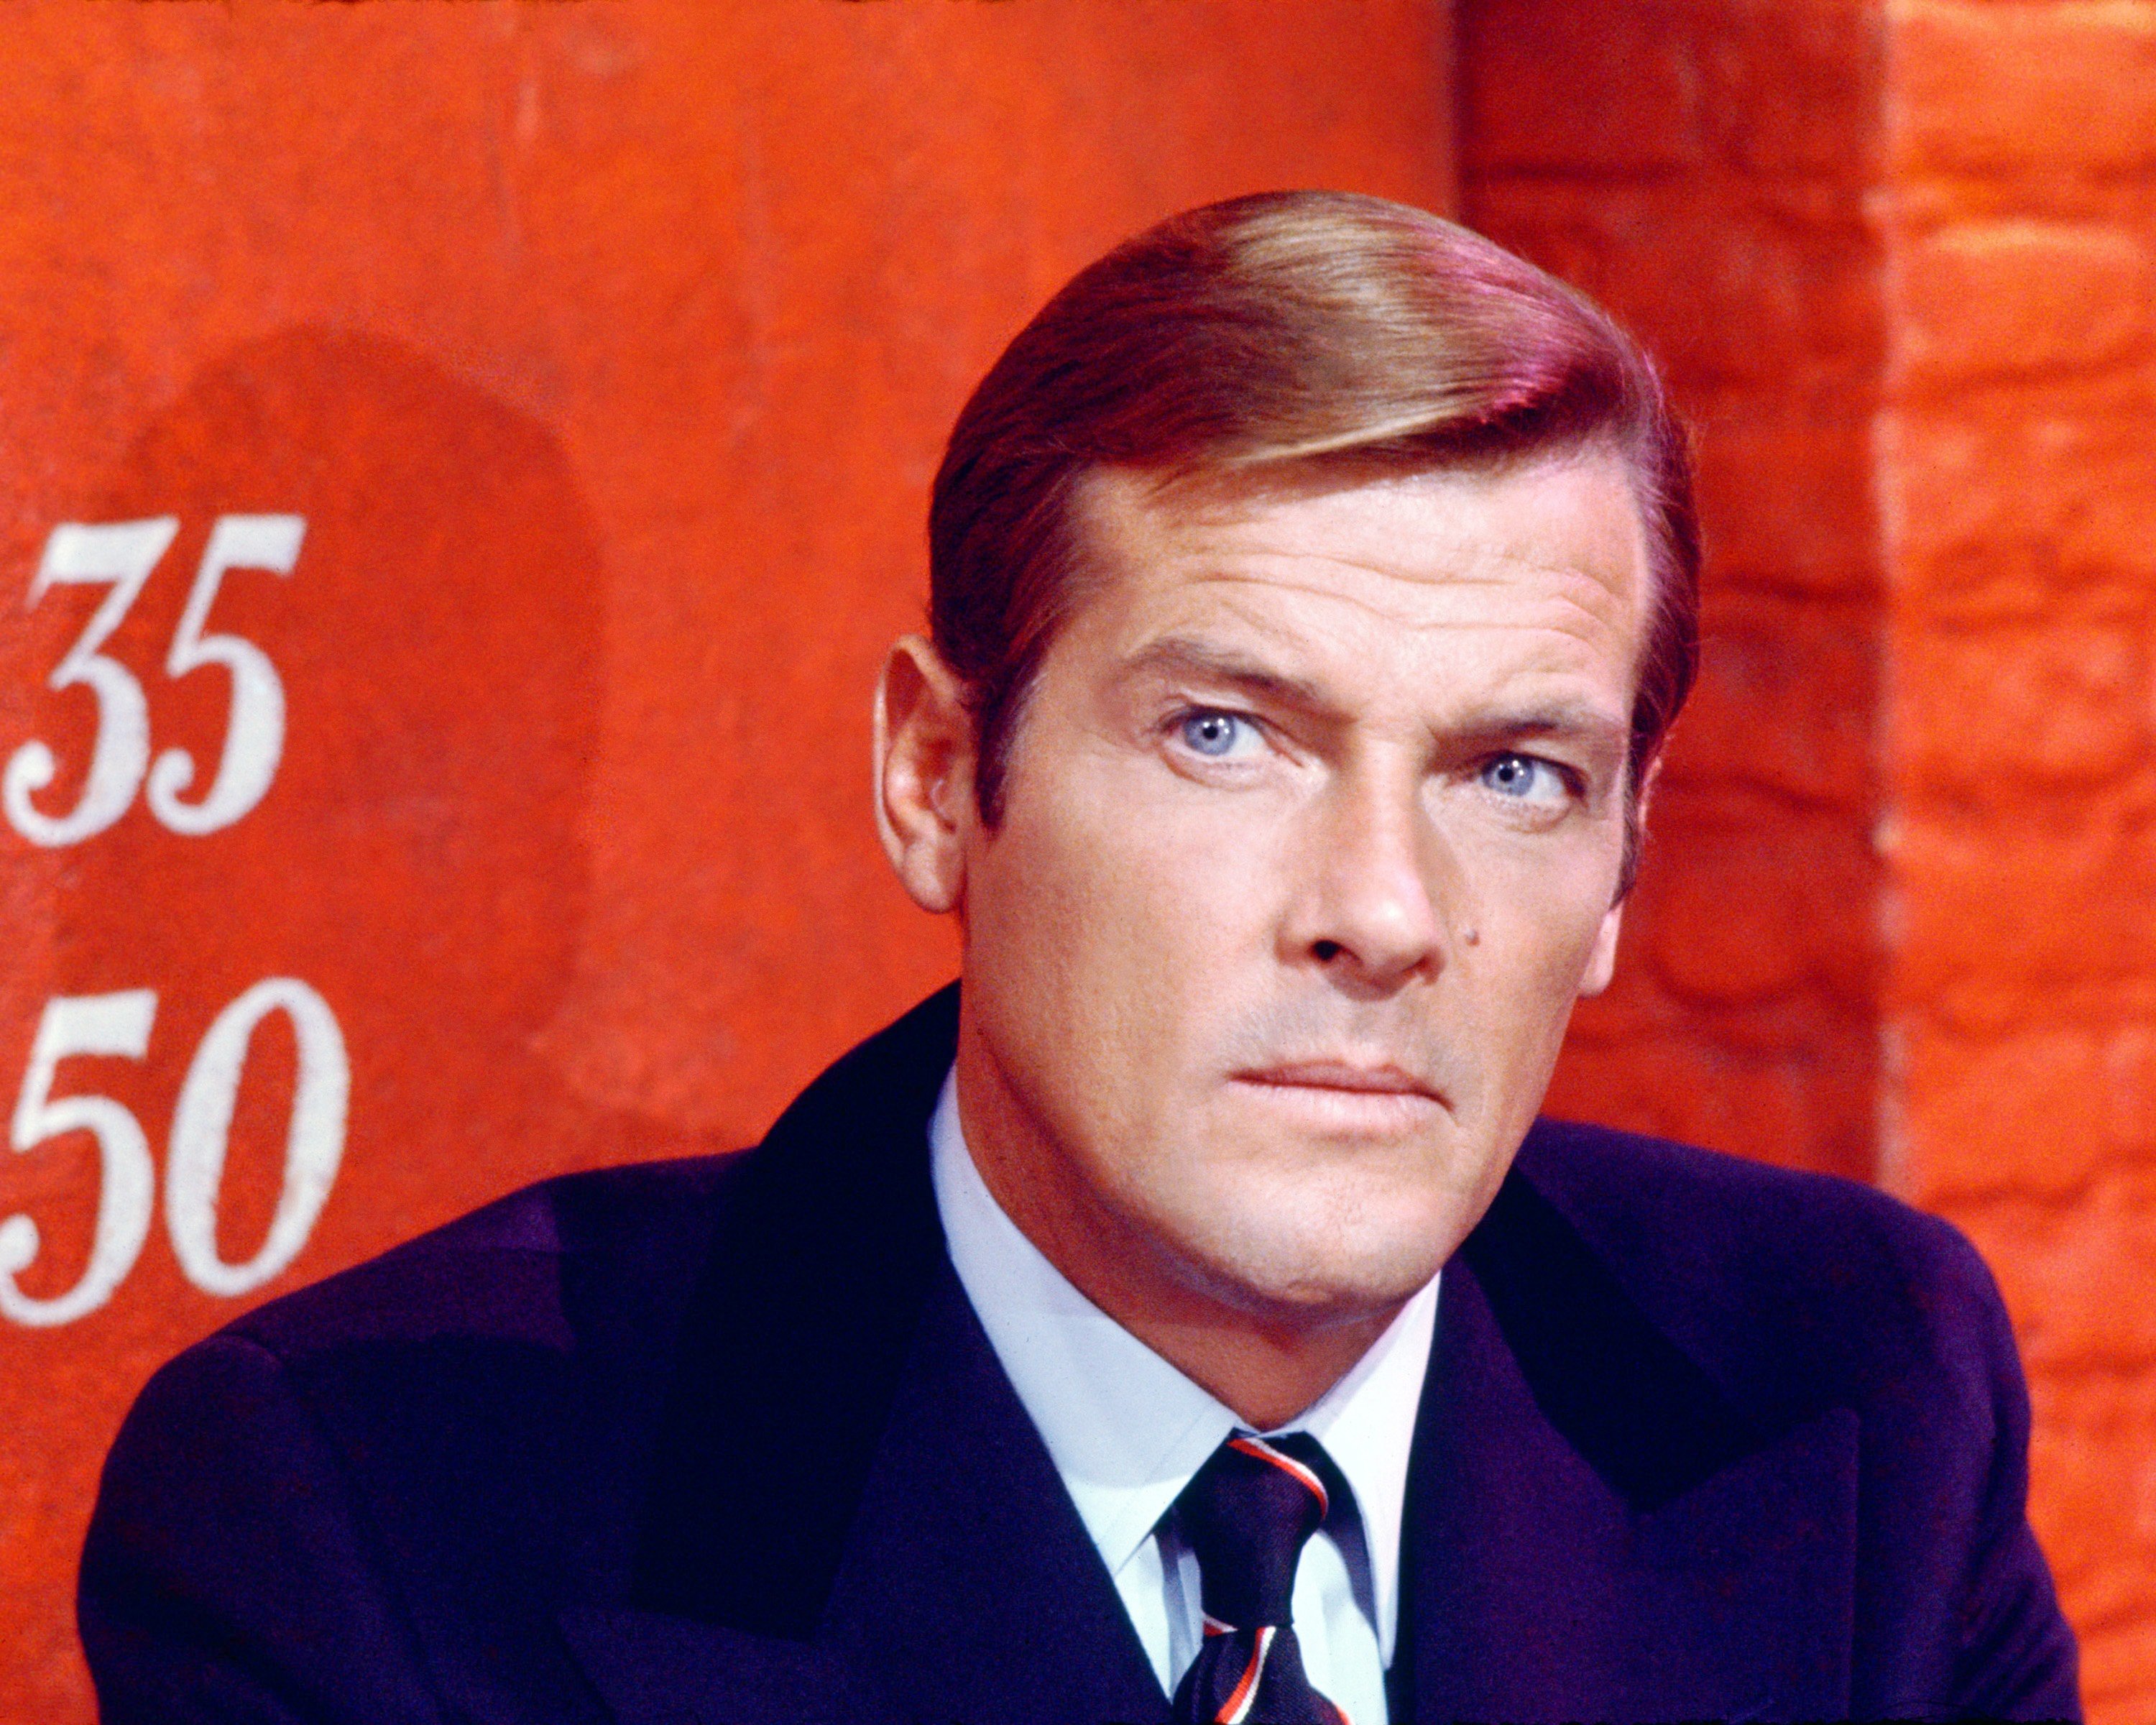 Roger Moore as James Bond in front of a red wall